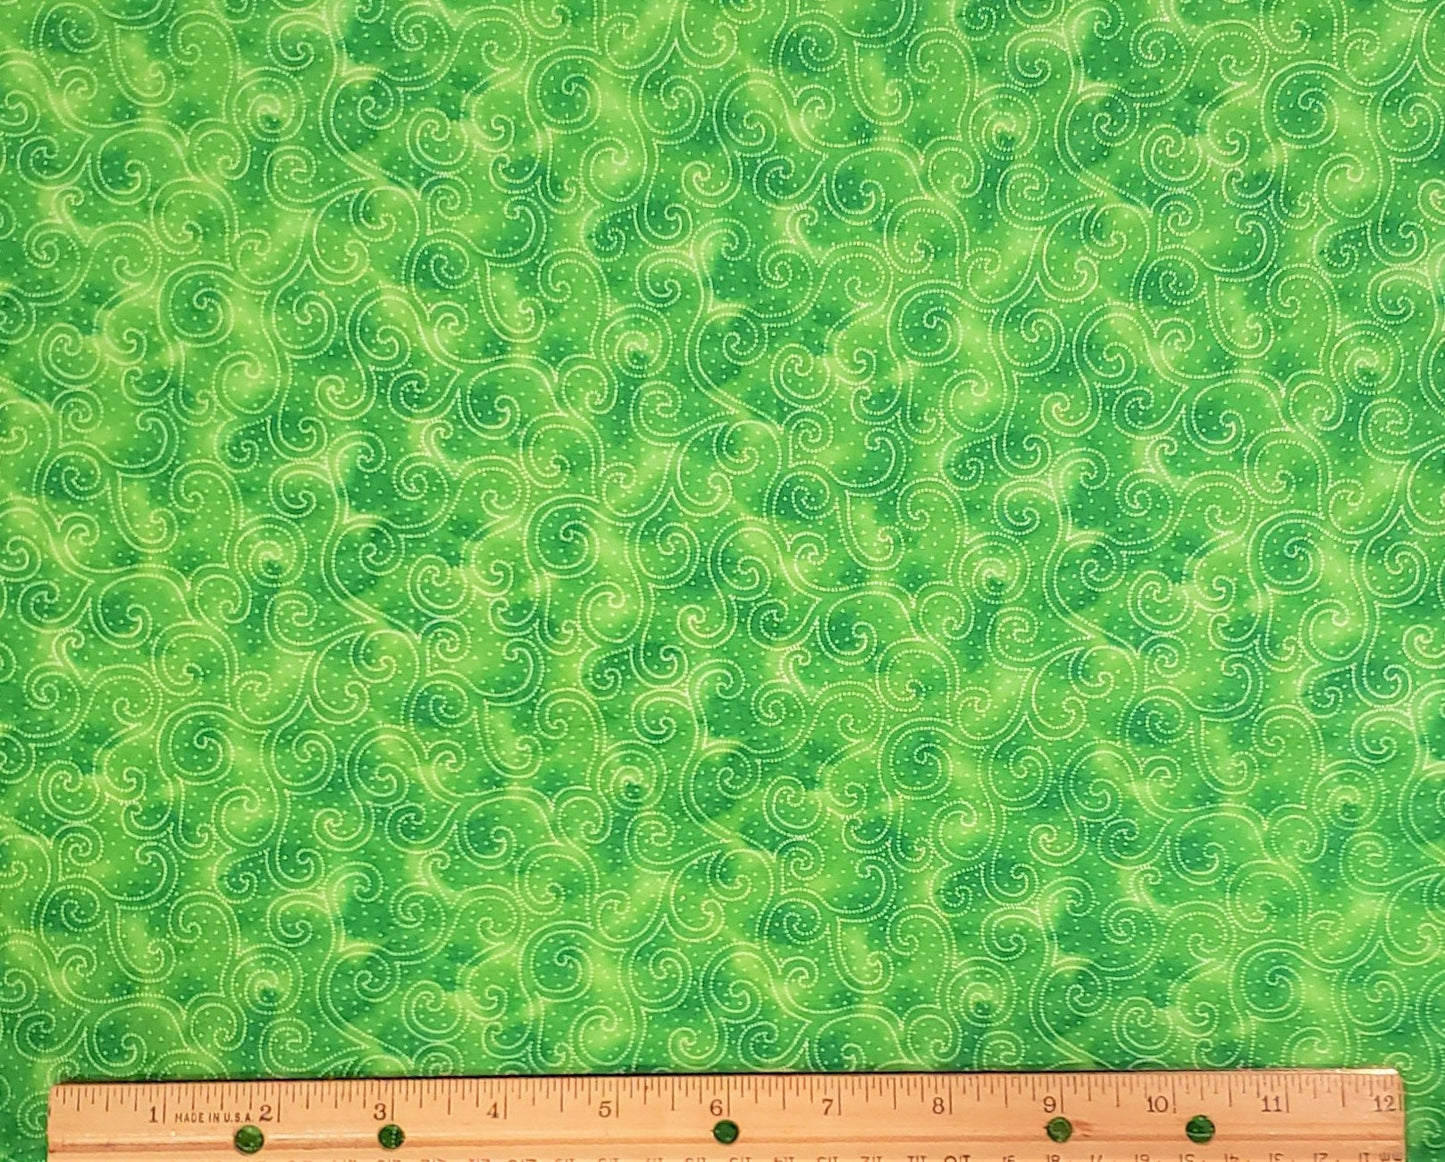 Exclusively for Jo-Ann Stores Screen Print D# 4742 Quilter's Spectrum - Dark and Bright Tonal Green Fabric / White Dot Scroll Pattern